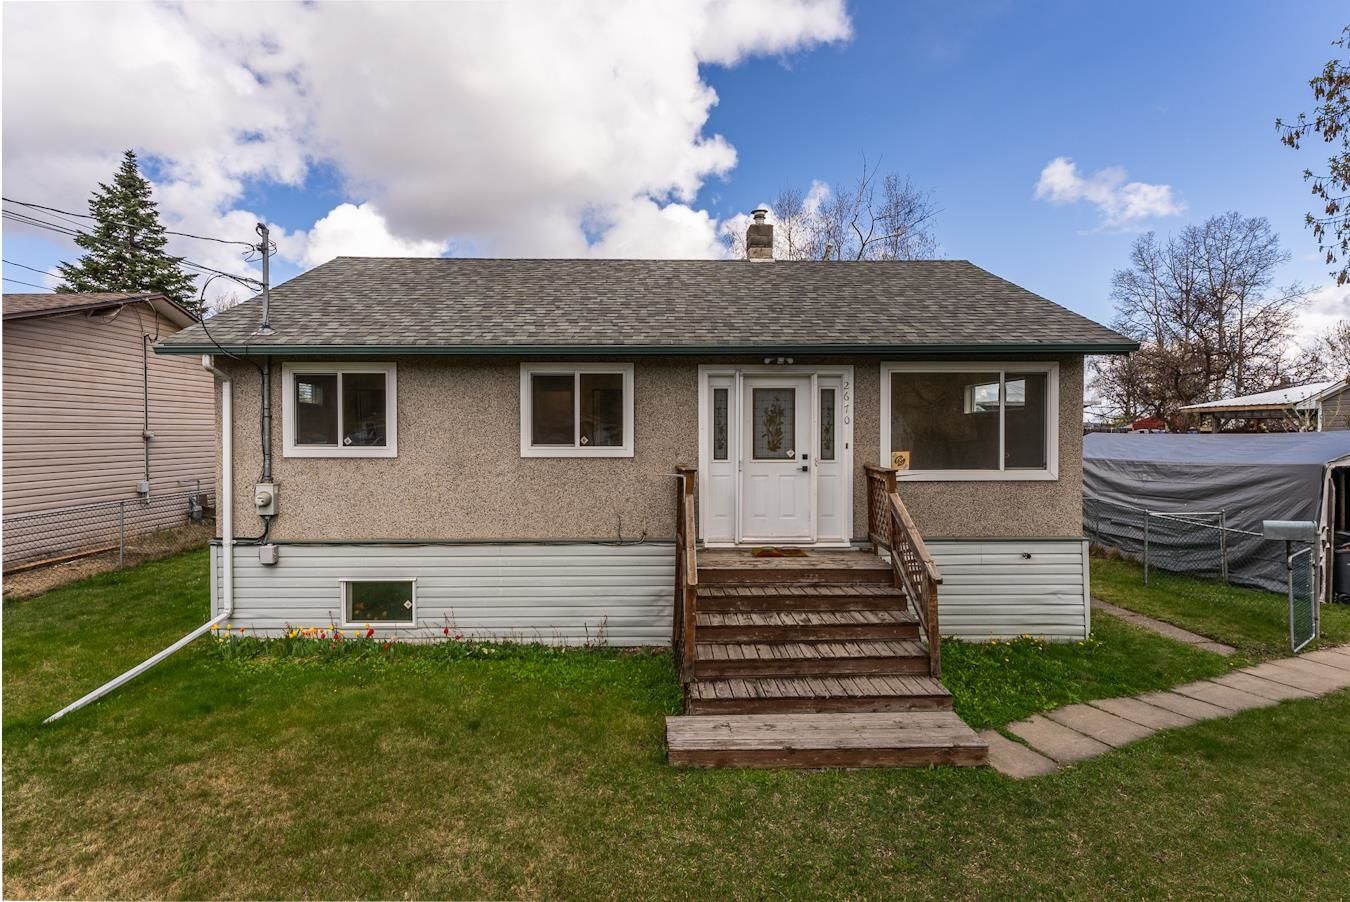 New property listed in Peden Hill, PG City West